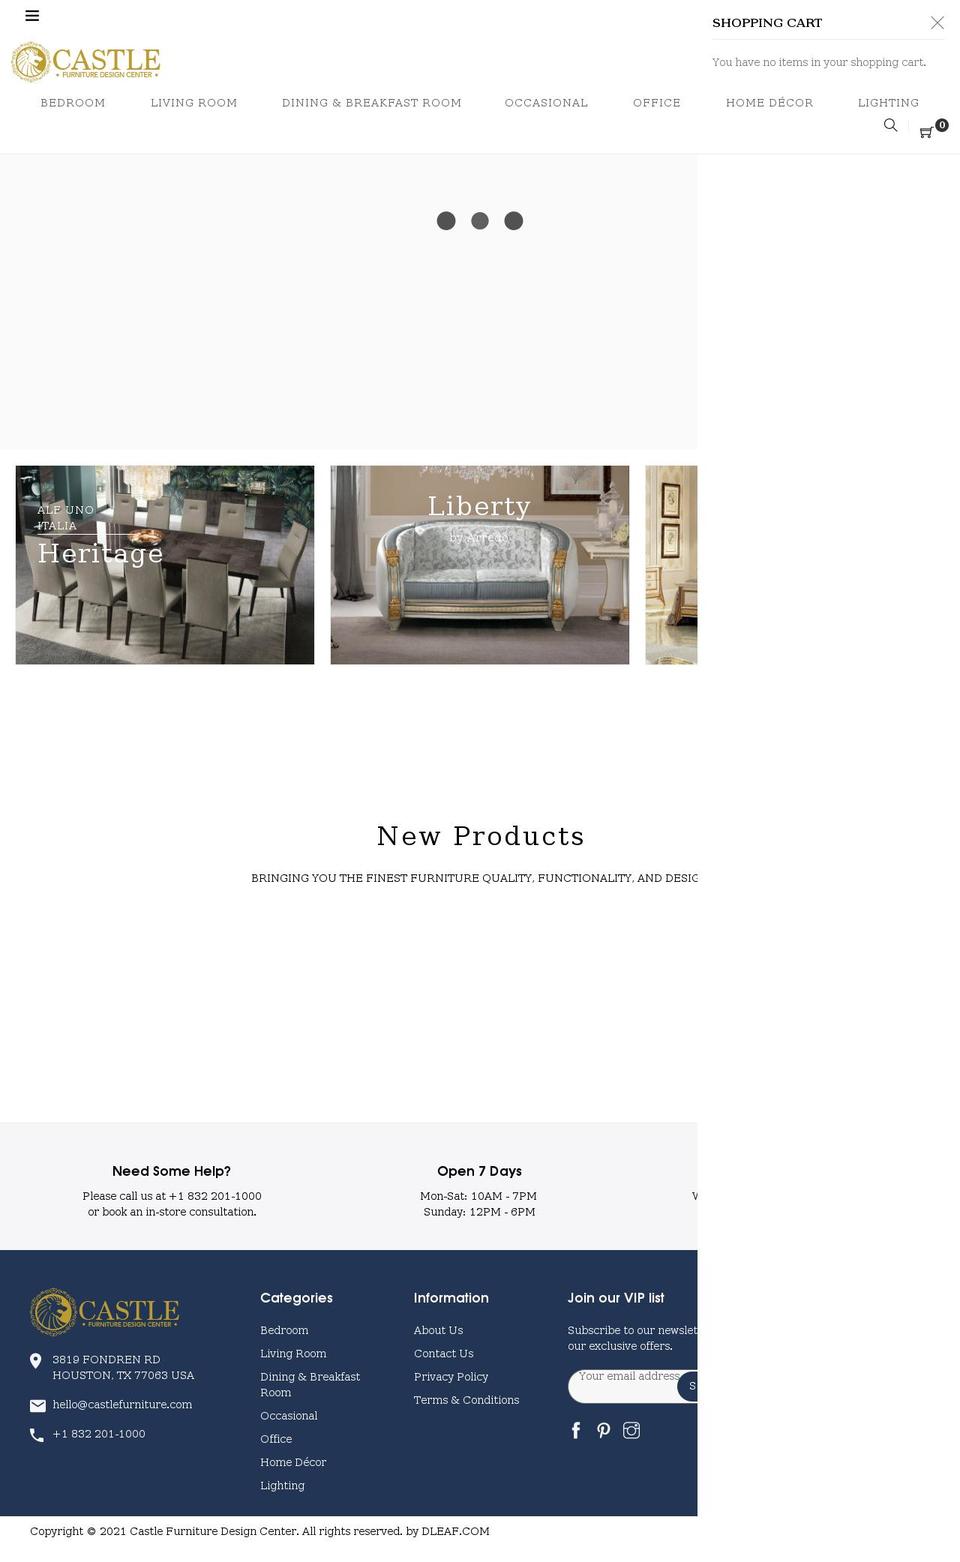 Amely Shopify theme site example castlef.com